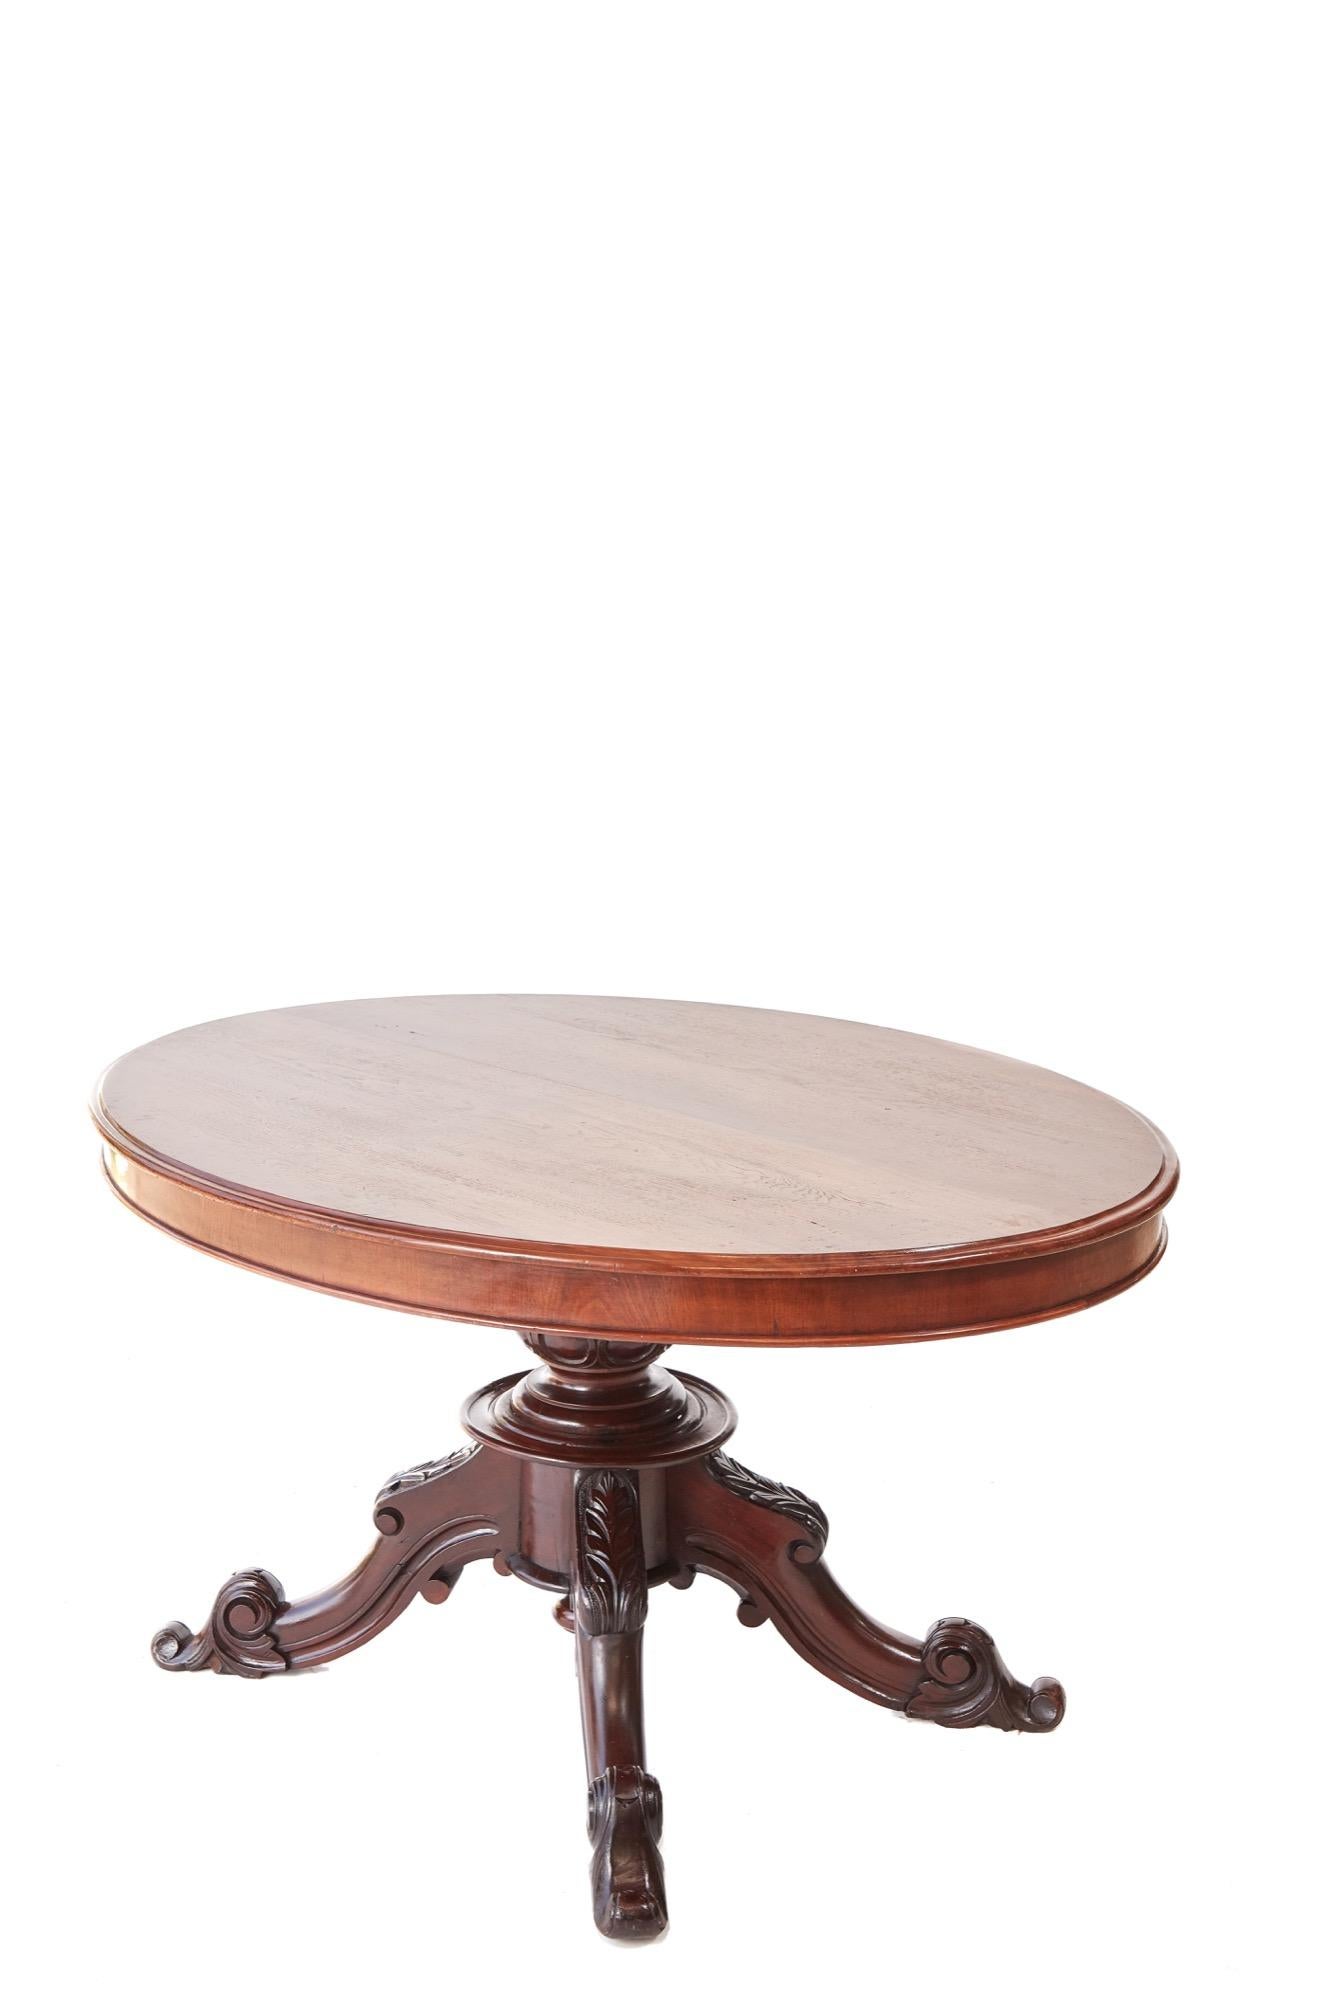 Quality Victorian Oval Mahogany Centre Table For Sale 2